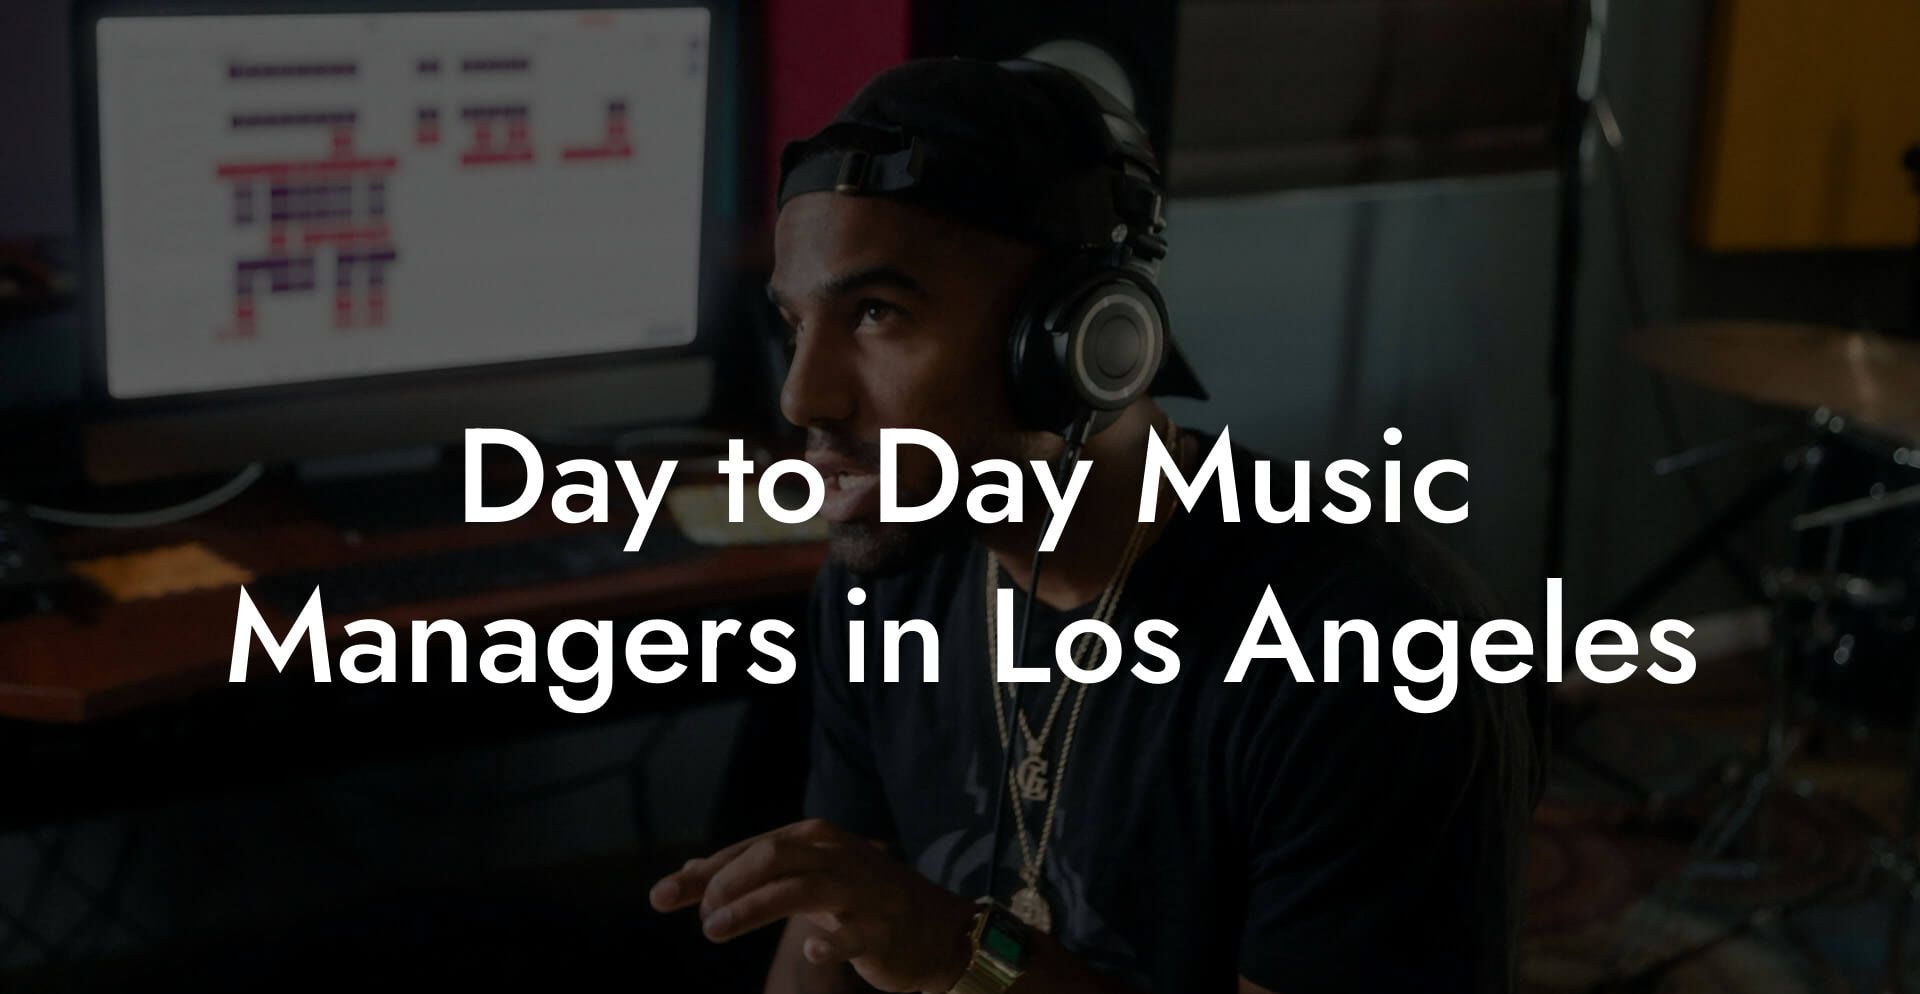 Day to Day Music Managers in Los Angeles